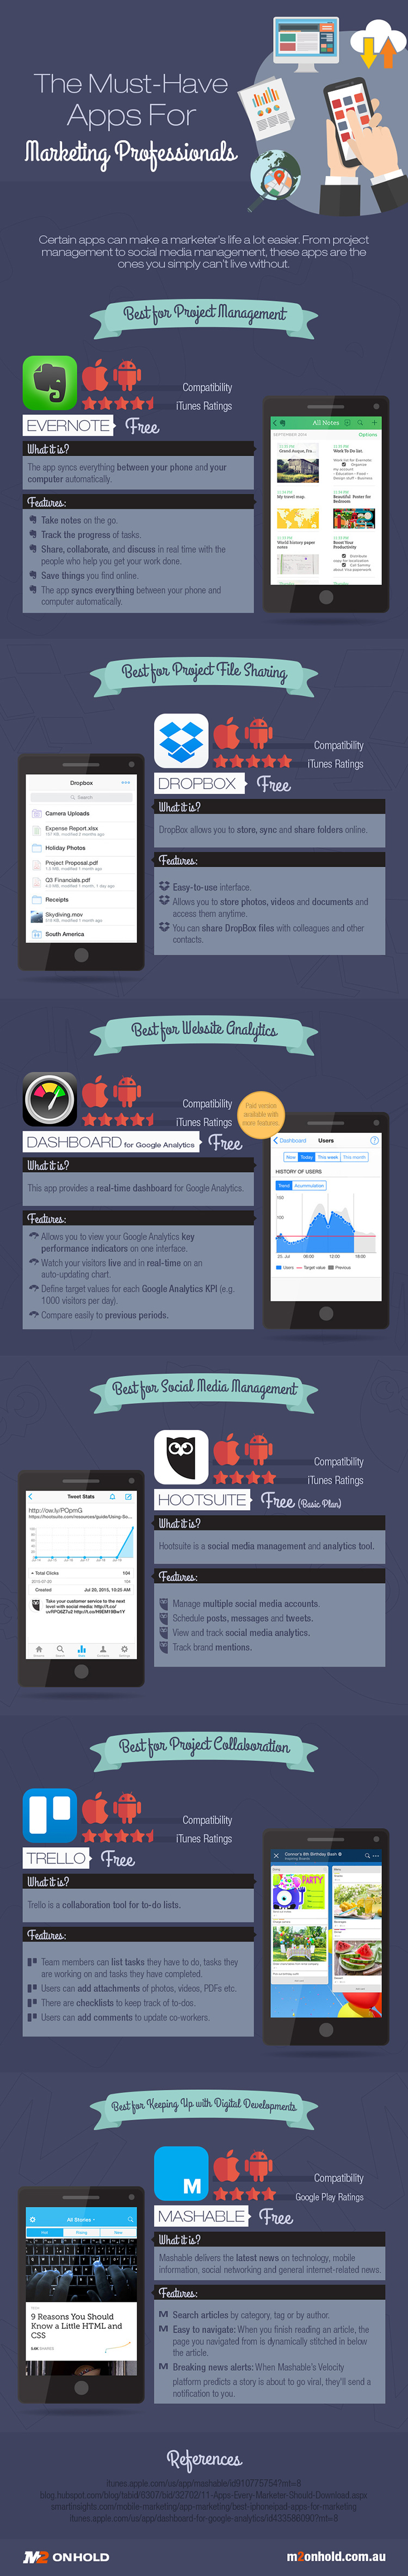 Infographic-Apps-for-Marketing-Professionals